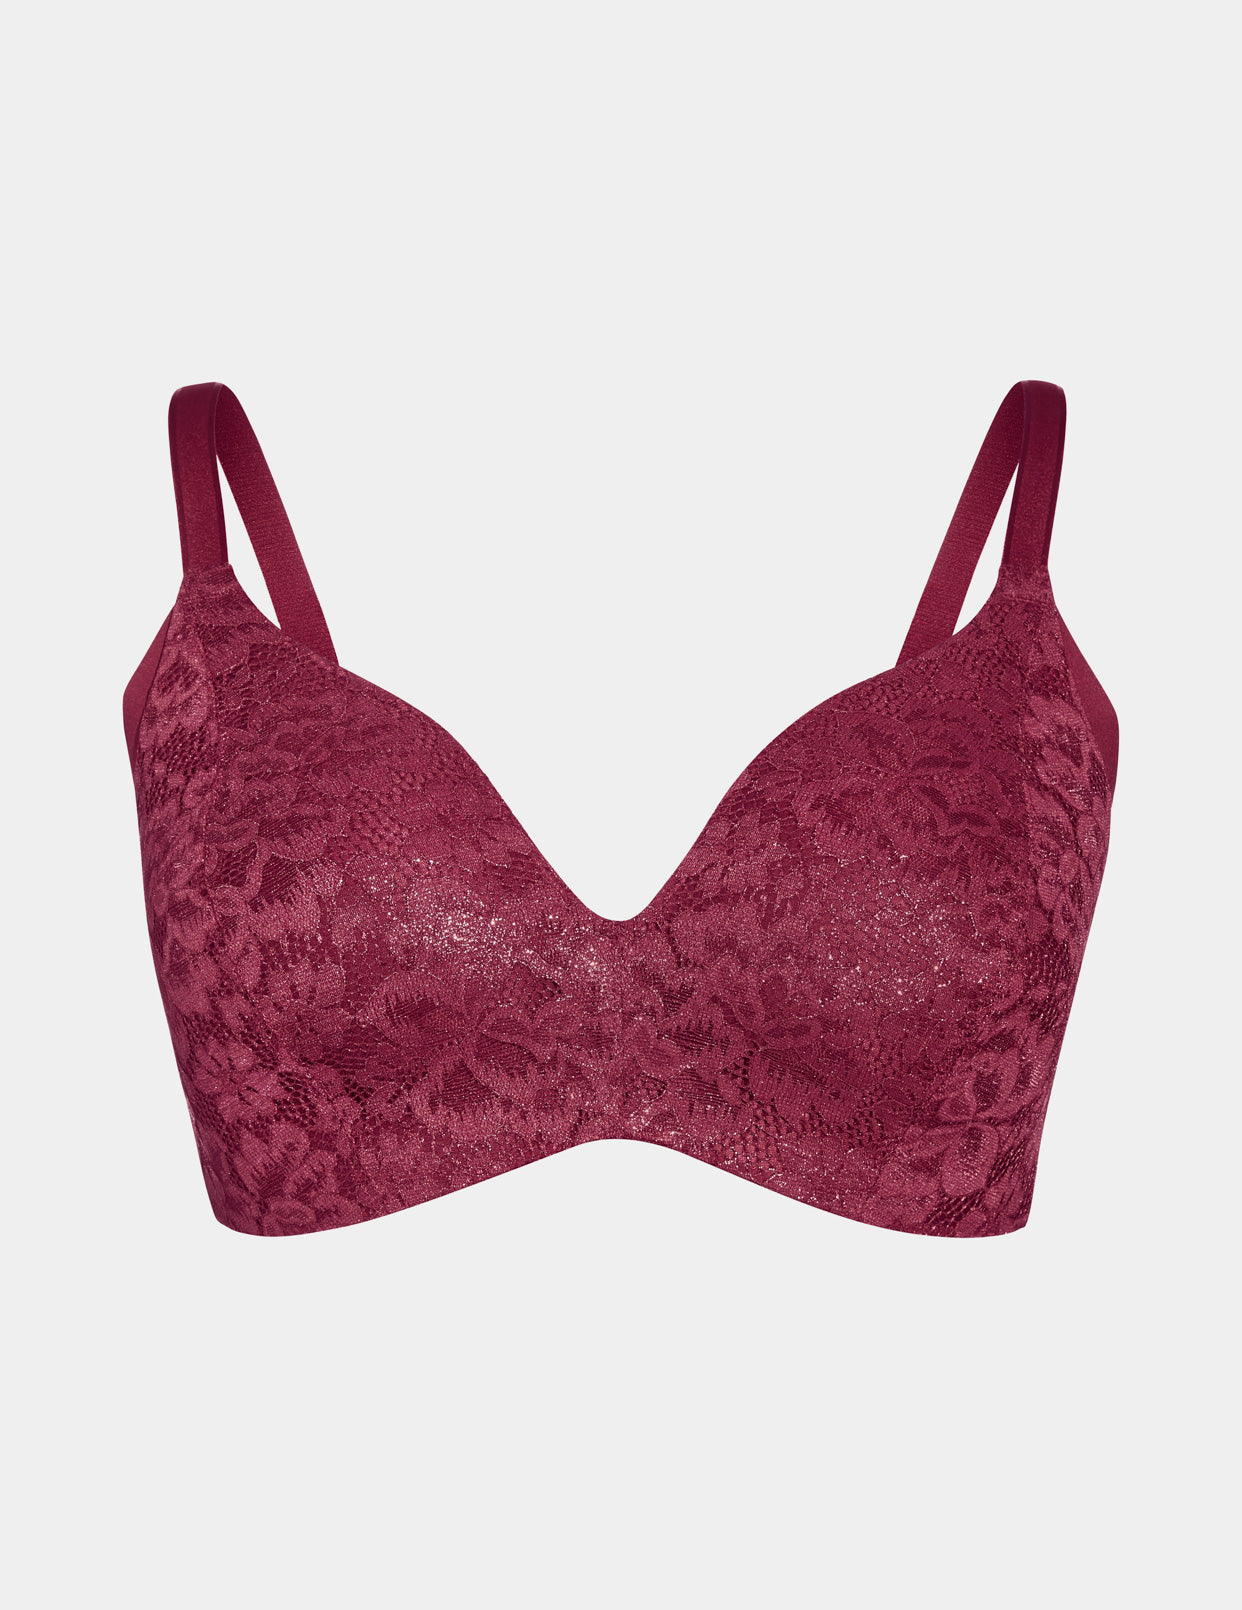 KNIX Lace WingWoman Wireless Contour Bra in Red Velvet Limited